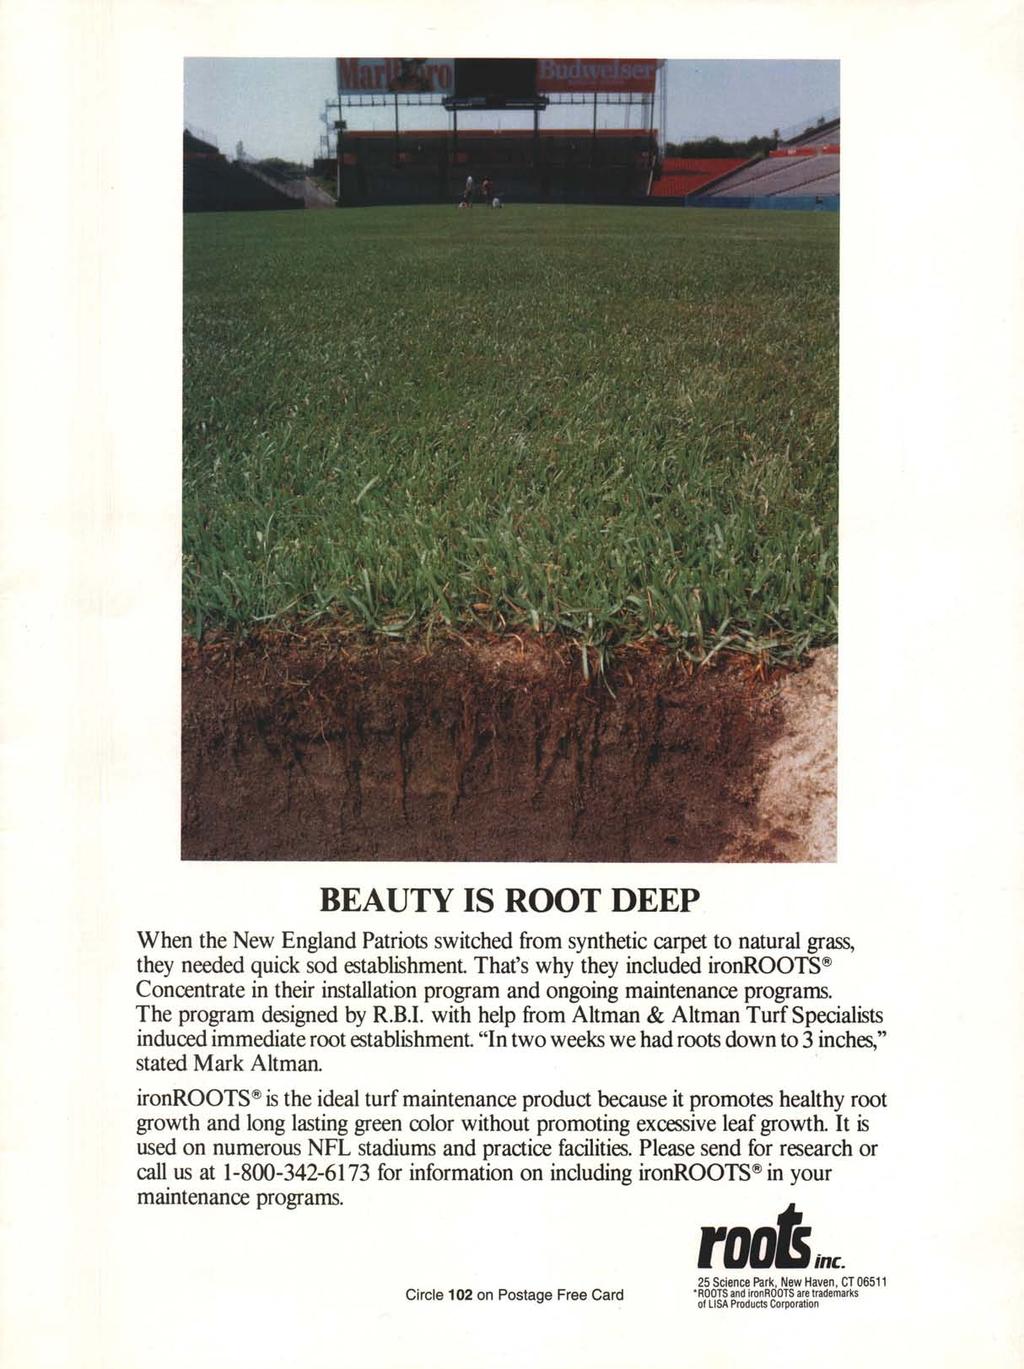 BEAUTY IS ROOT DEEP When the New England Patriots switched from synthetic carpet to natural grass, they needed quick sod establishment.